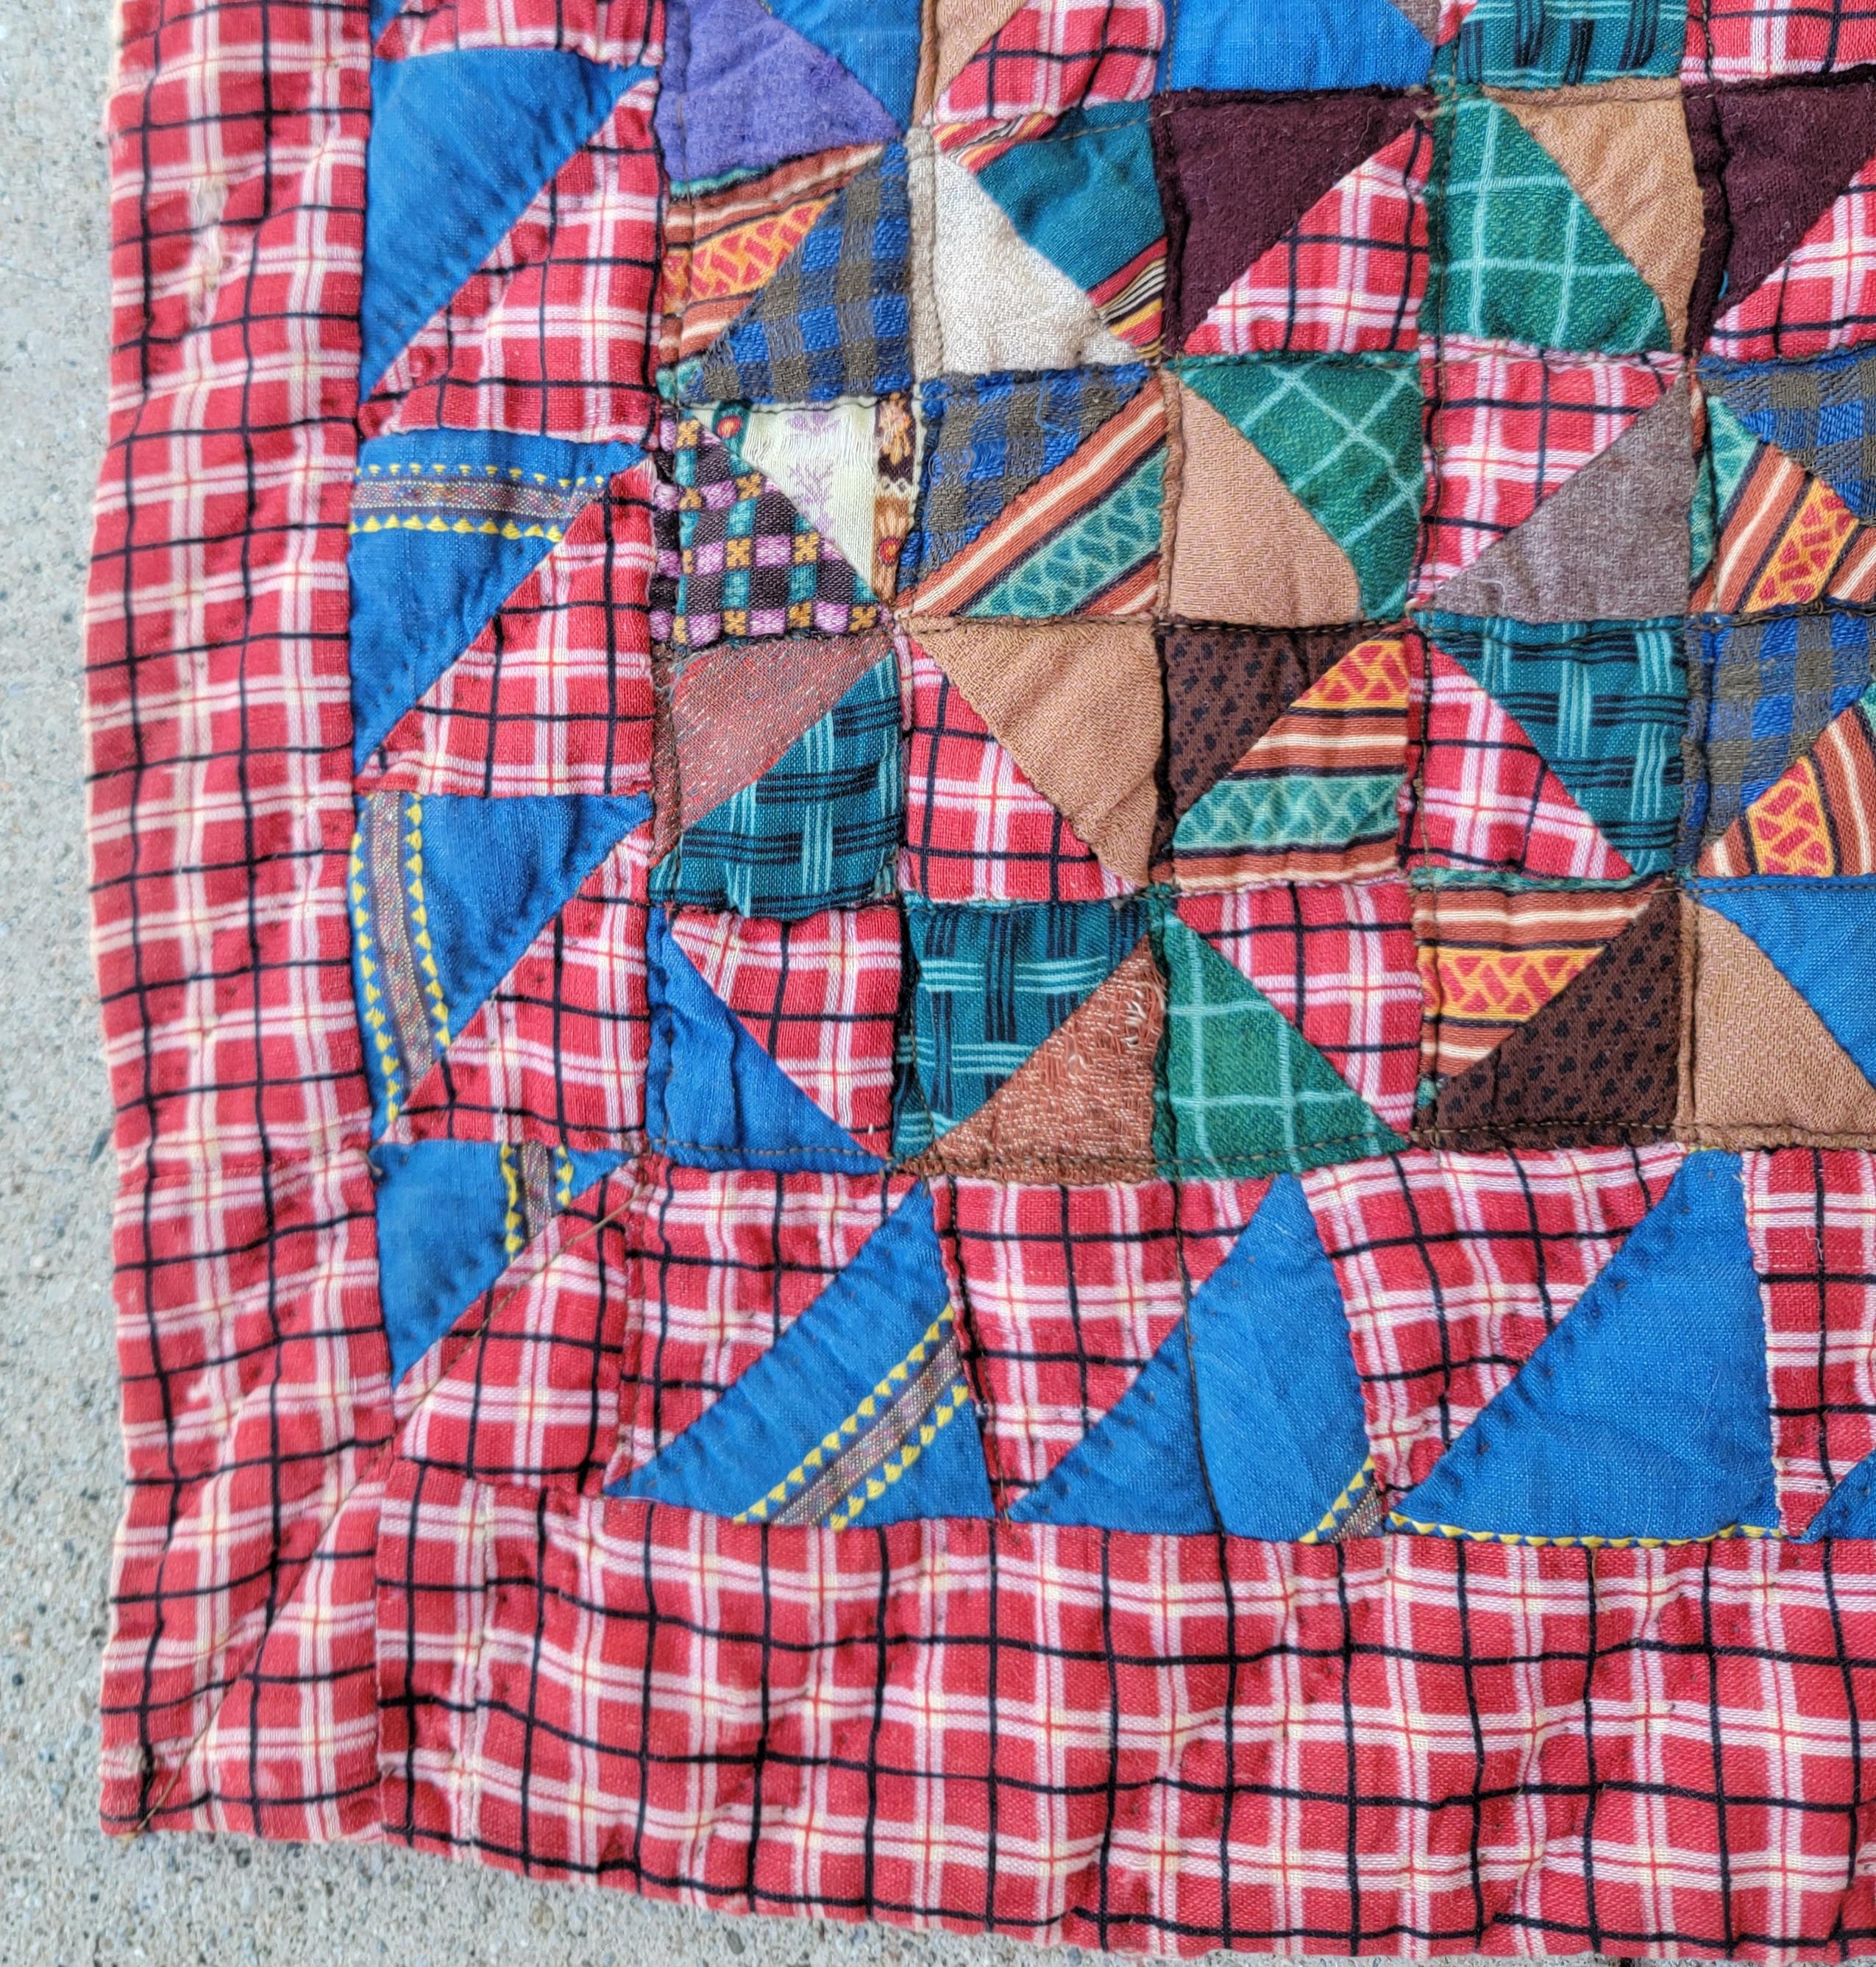 This fine hand made mini pieced broken dishes crib quilt is in pristine condition and super rare. The workmanship is very fine.